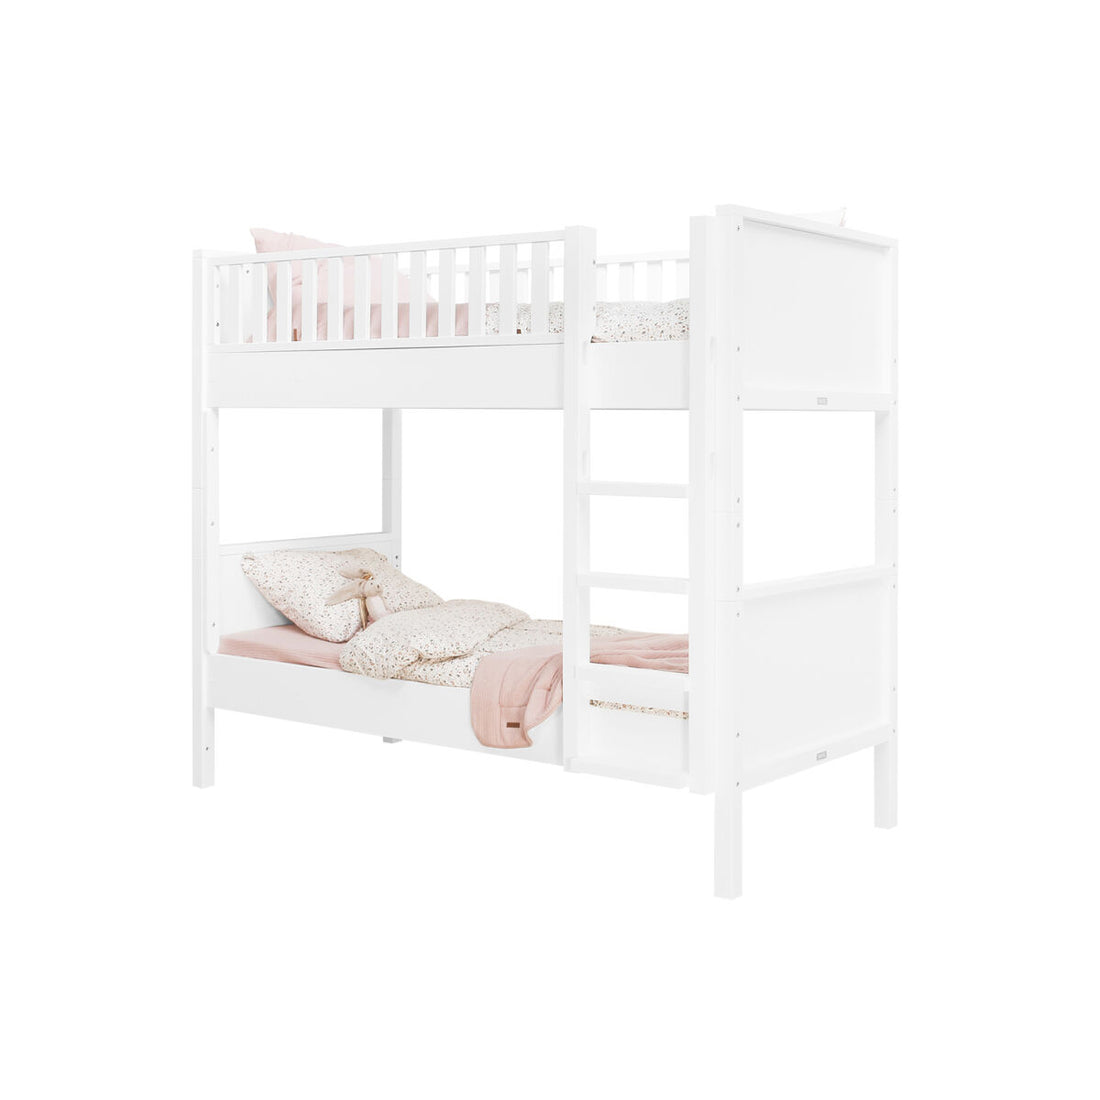 bopita-bunk-bed-90x200-with-straight-stairs-nordic-white-bopt-56313911- (2)